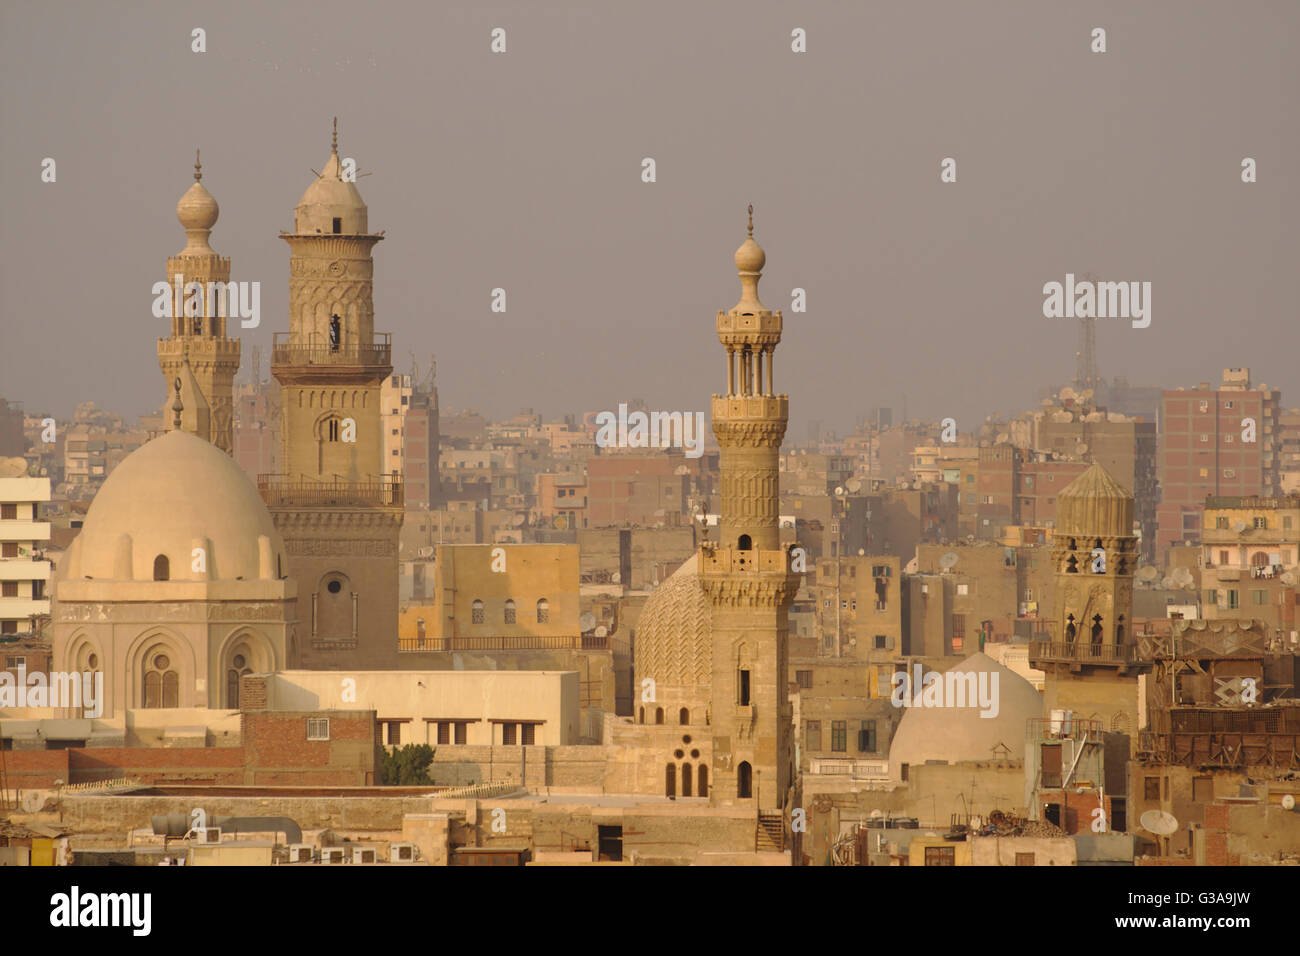 Minarets and domes of Qalawun complex, Barquq complex and Mosque of al-Ashraf Barsbey, evening, from minaret Bab Zuweila, Cairo Stock Photo